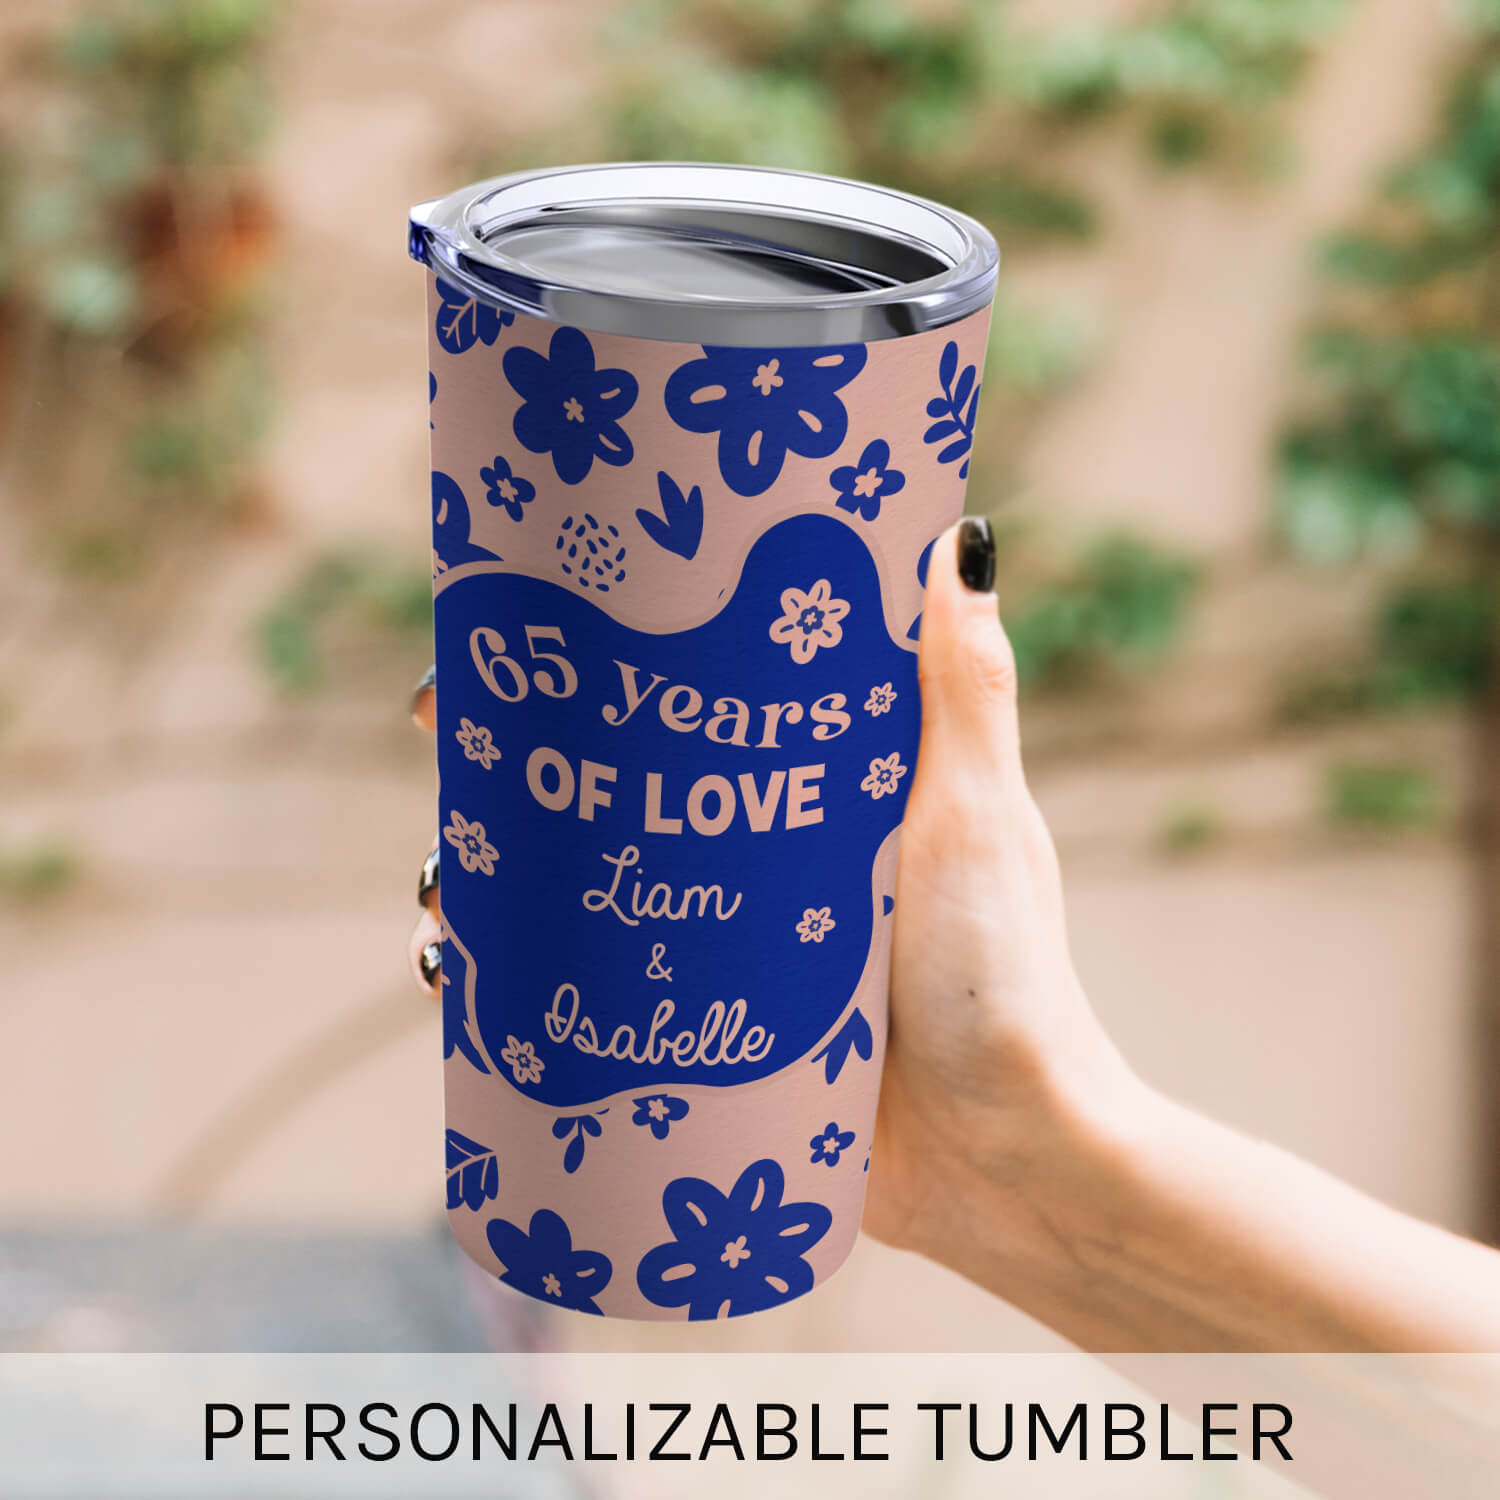 65 Years Of Love - Personalized 65 Year Anniversary gift For Husband or Wife - Custom Tumbler - MyMindfulGifts